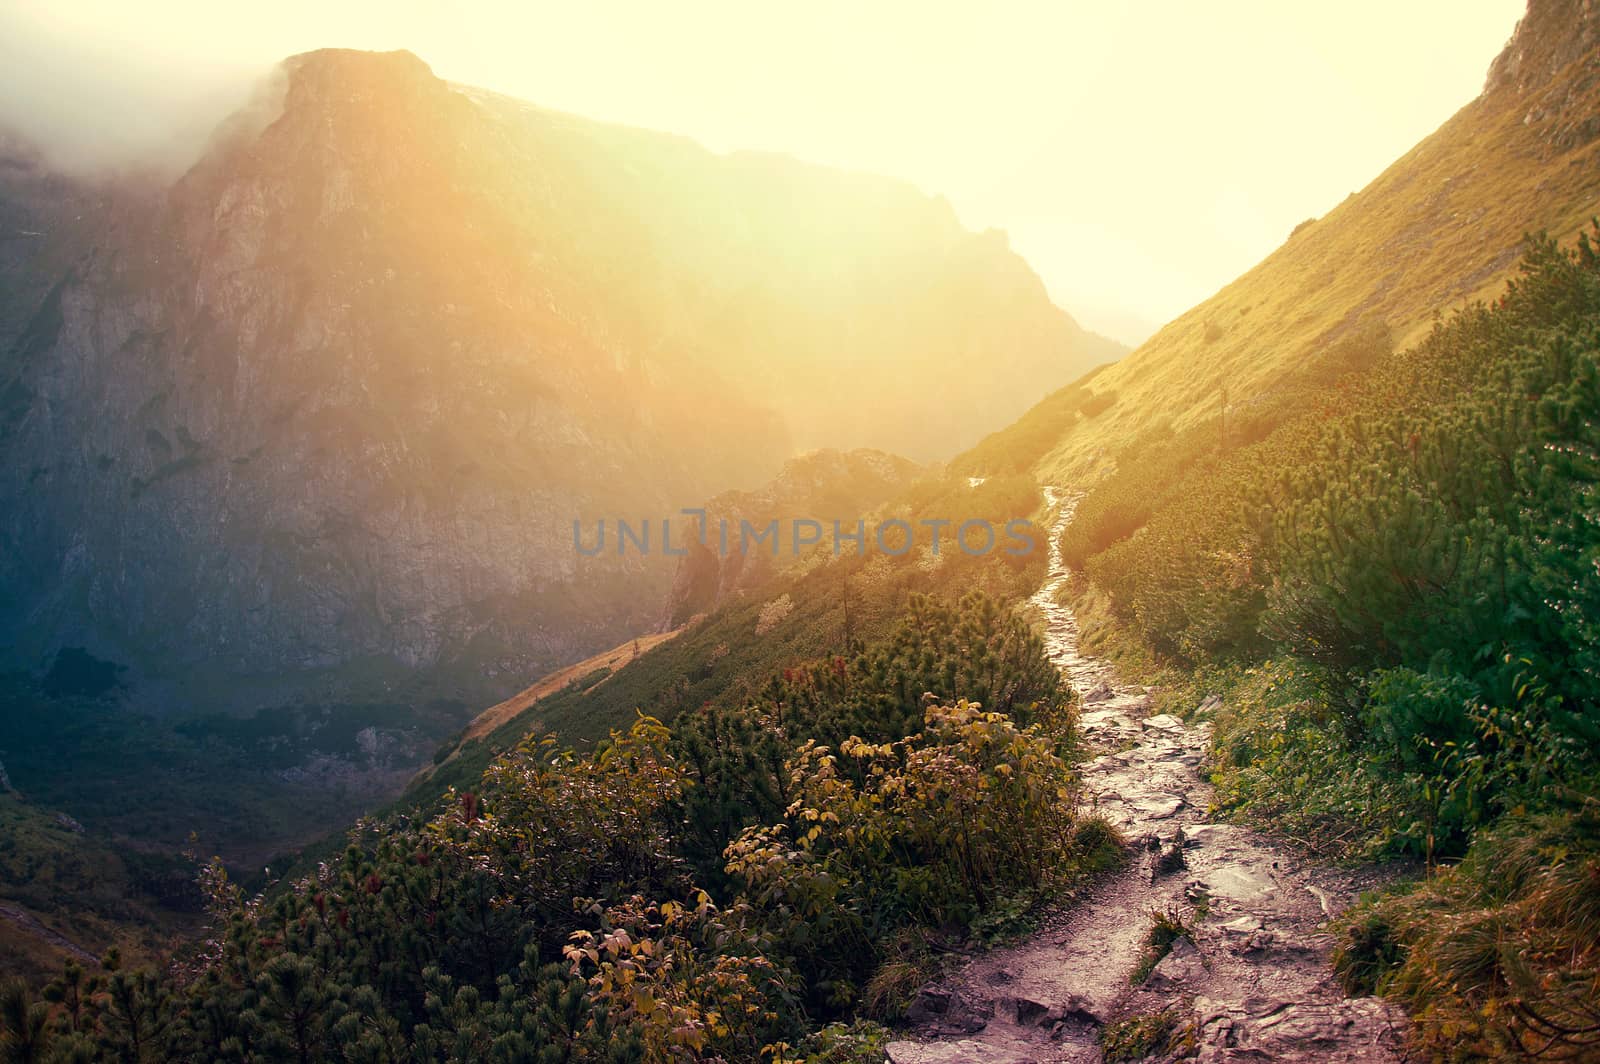 Path in beautiful mountains at sundown. Nature conceptual image.